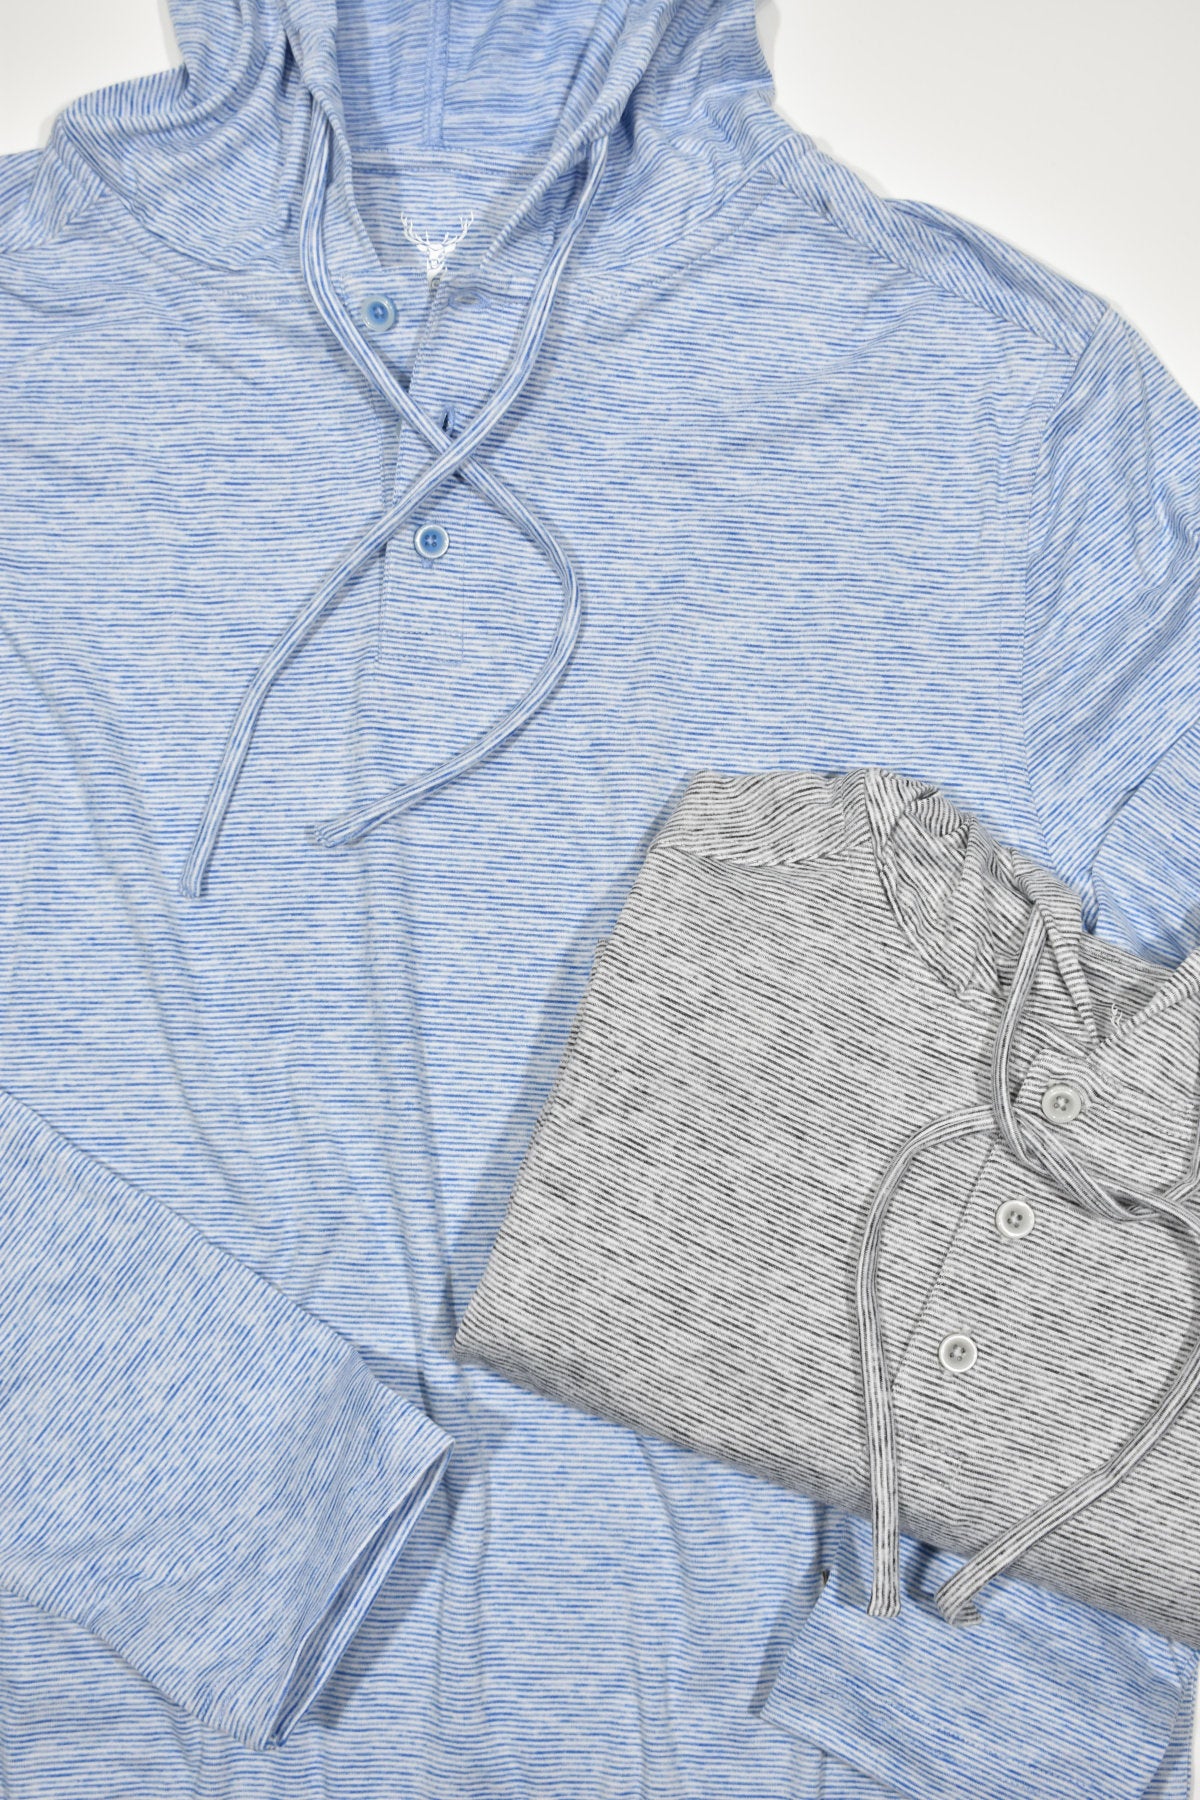 This classic fit feed stripe hoodie offers a contemporary style in a lightweight fabric with a soft, silky feel. The open sleeve and open bottom provide added mobility for all-day comfort. Available in gray or blue, it is the perfect hoodie for any occasion.  Classic fit.